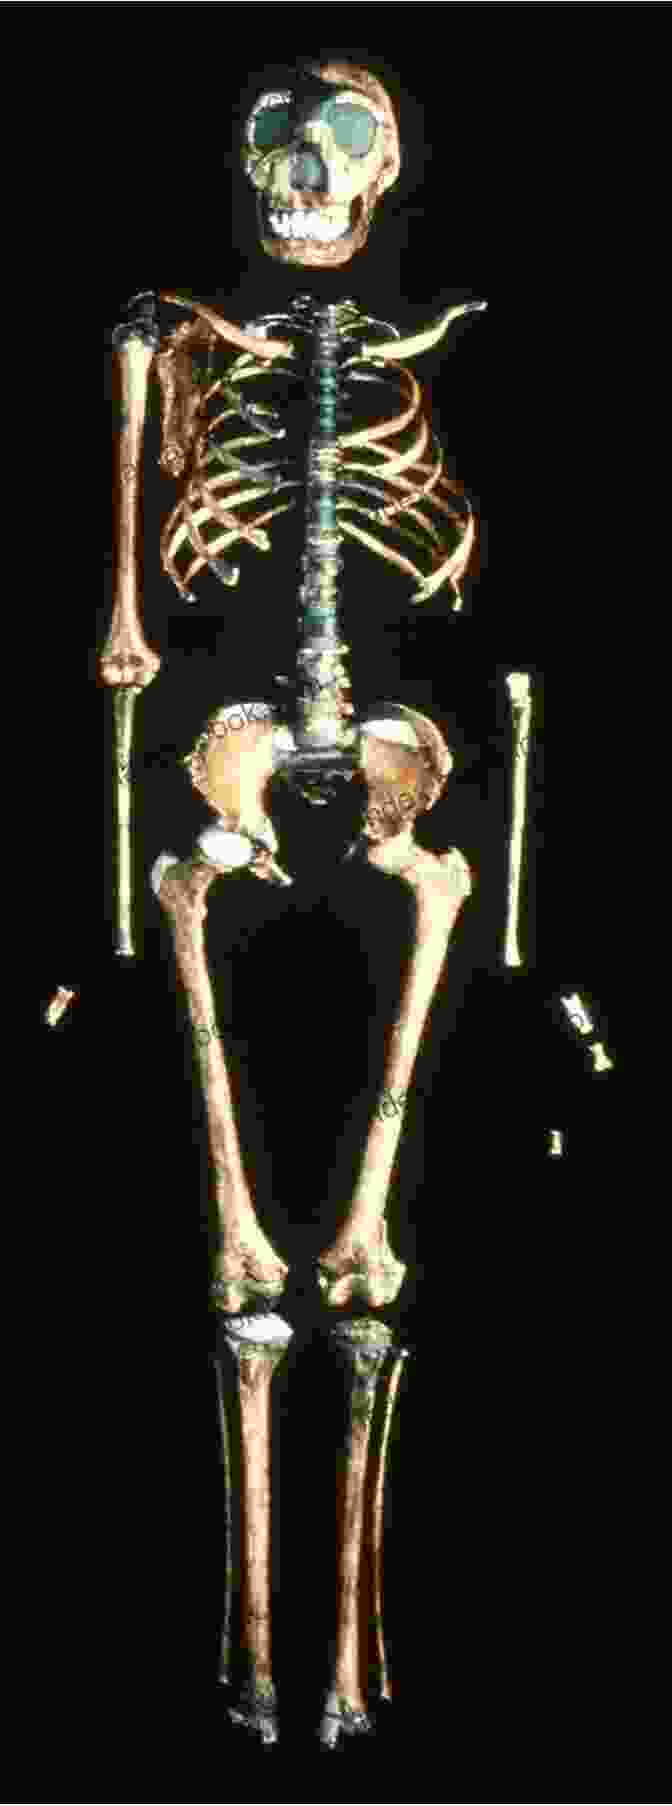 An Image Of The Reconstructed Skeleton Of The Dorset Boy The Trojan Horse: The Dorset Boy 7